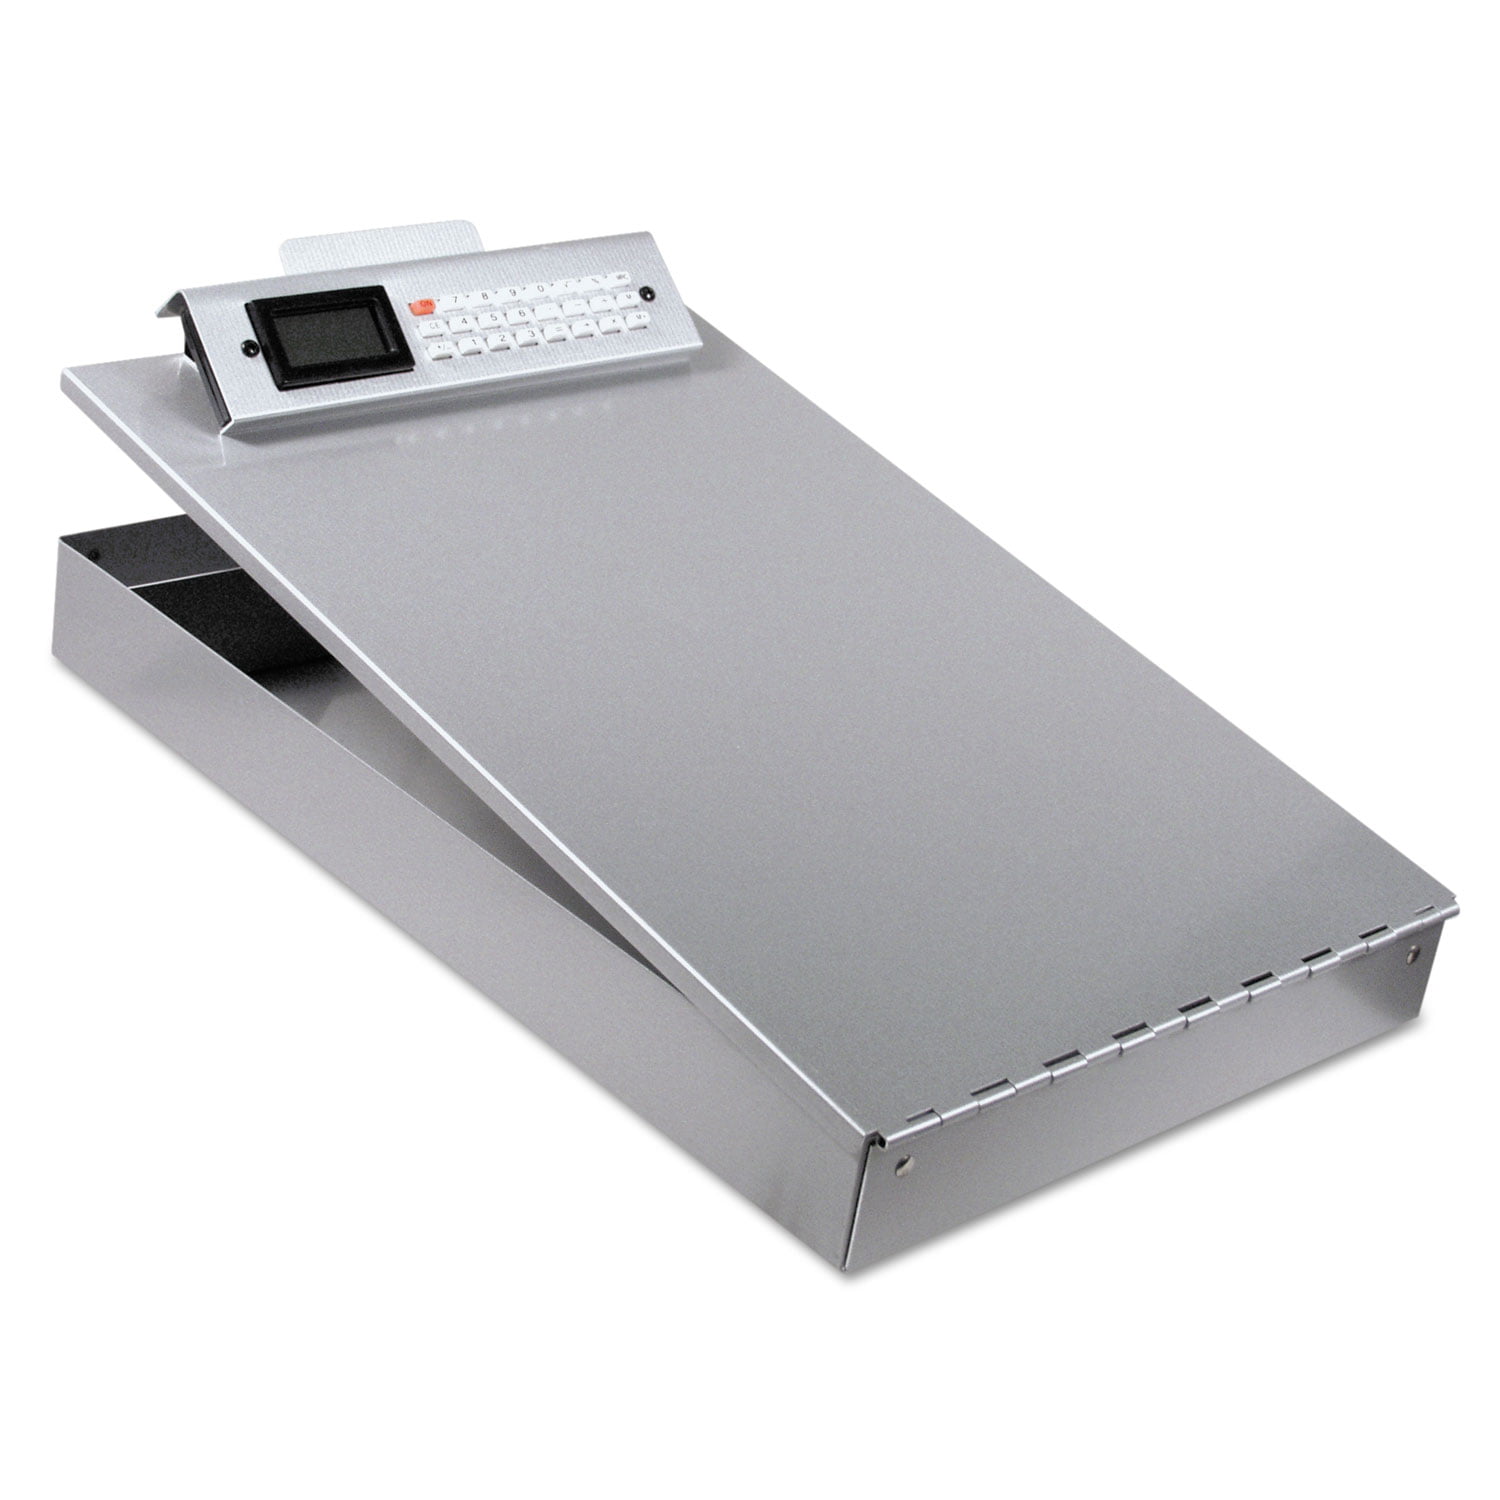 Officemate Aluminum Forms Storage Clipboard, 8.5 x 12 inch (83200 